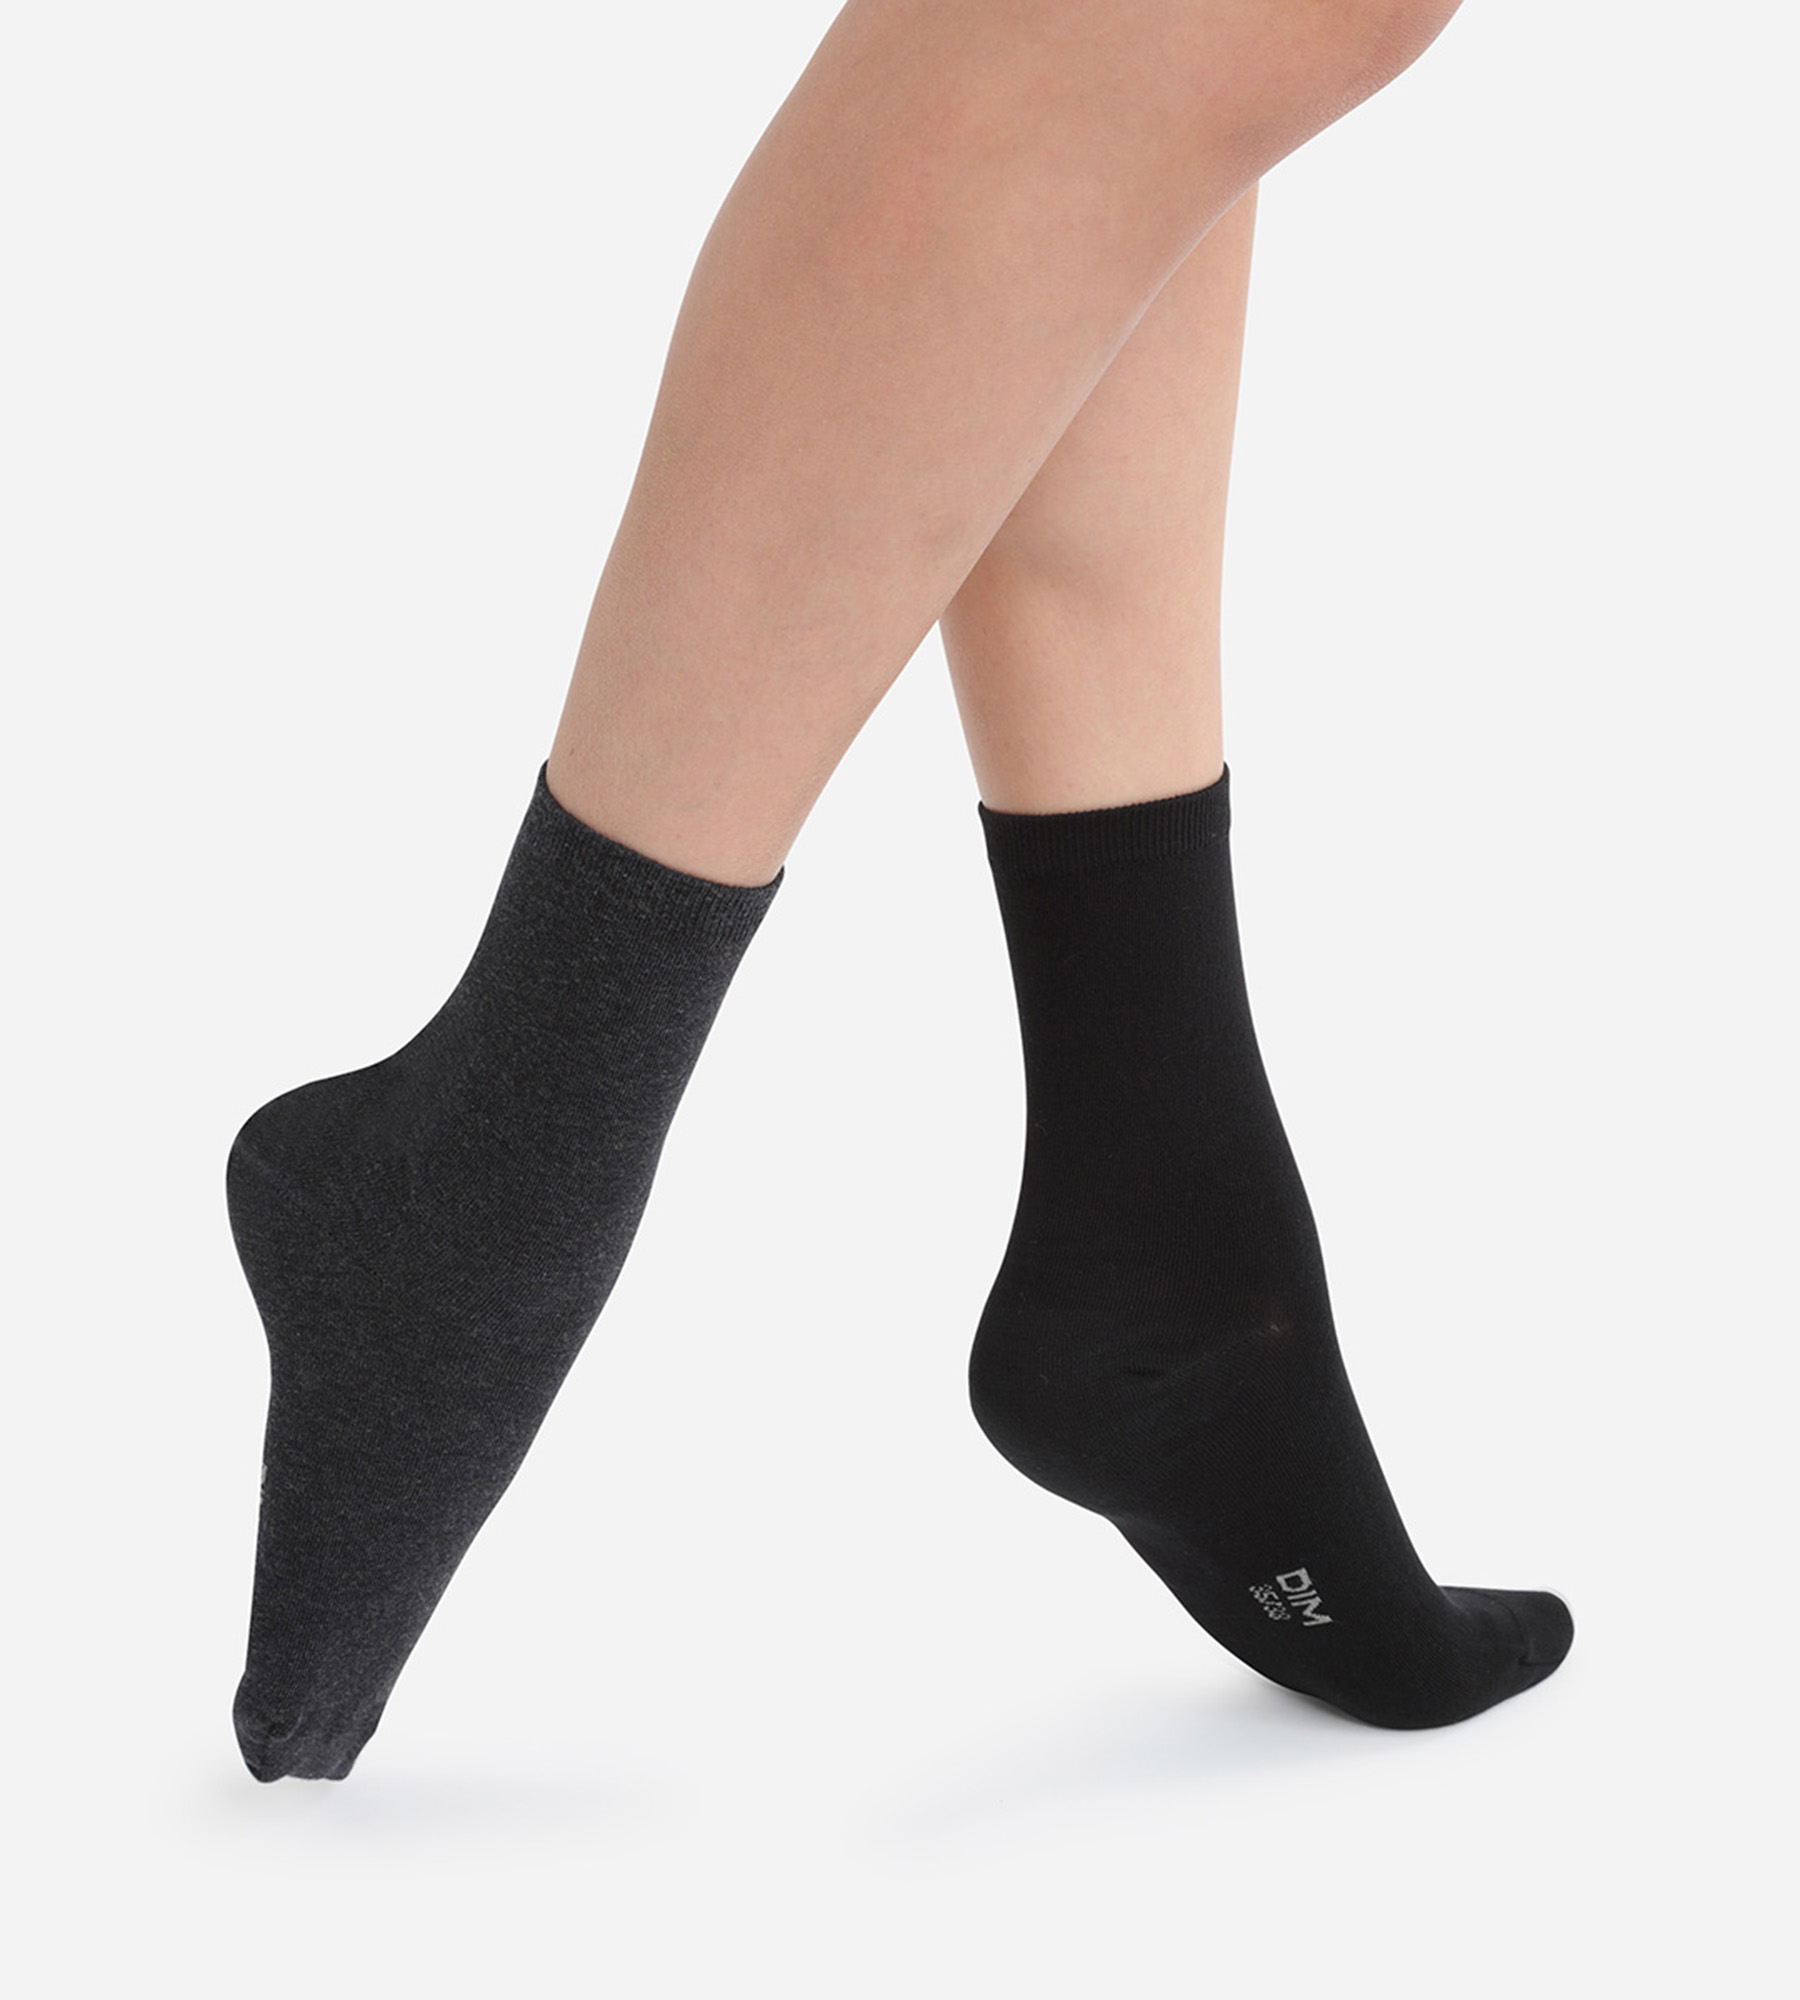 Pack calcetines mujer M. 152075 UNICA MUY DEMI